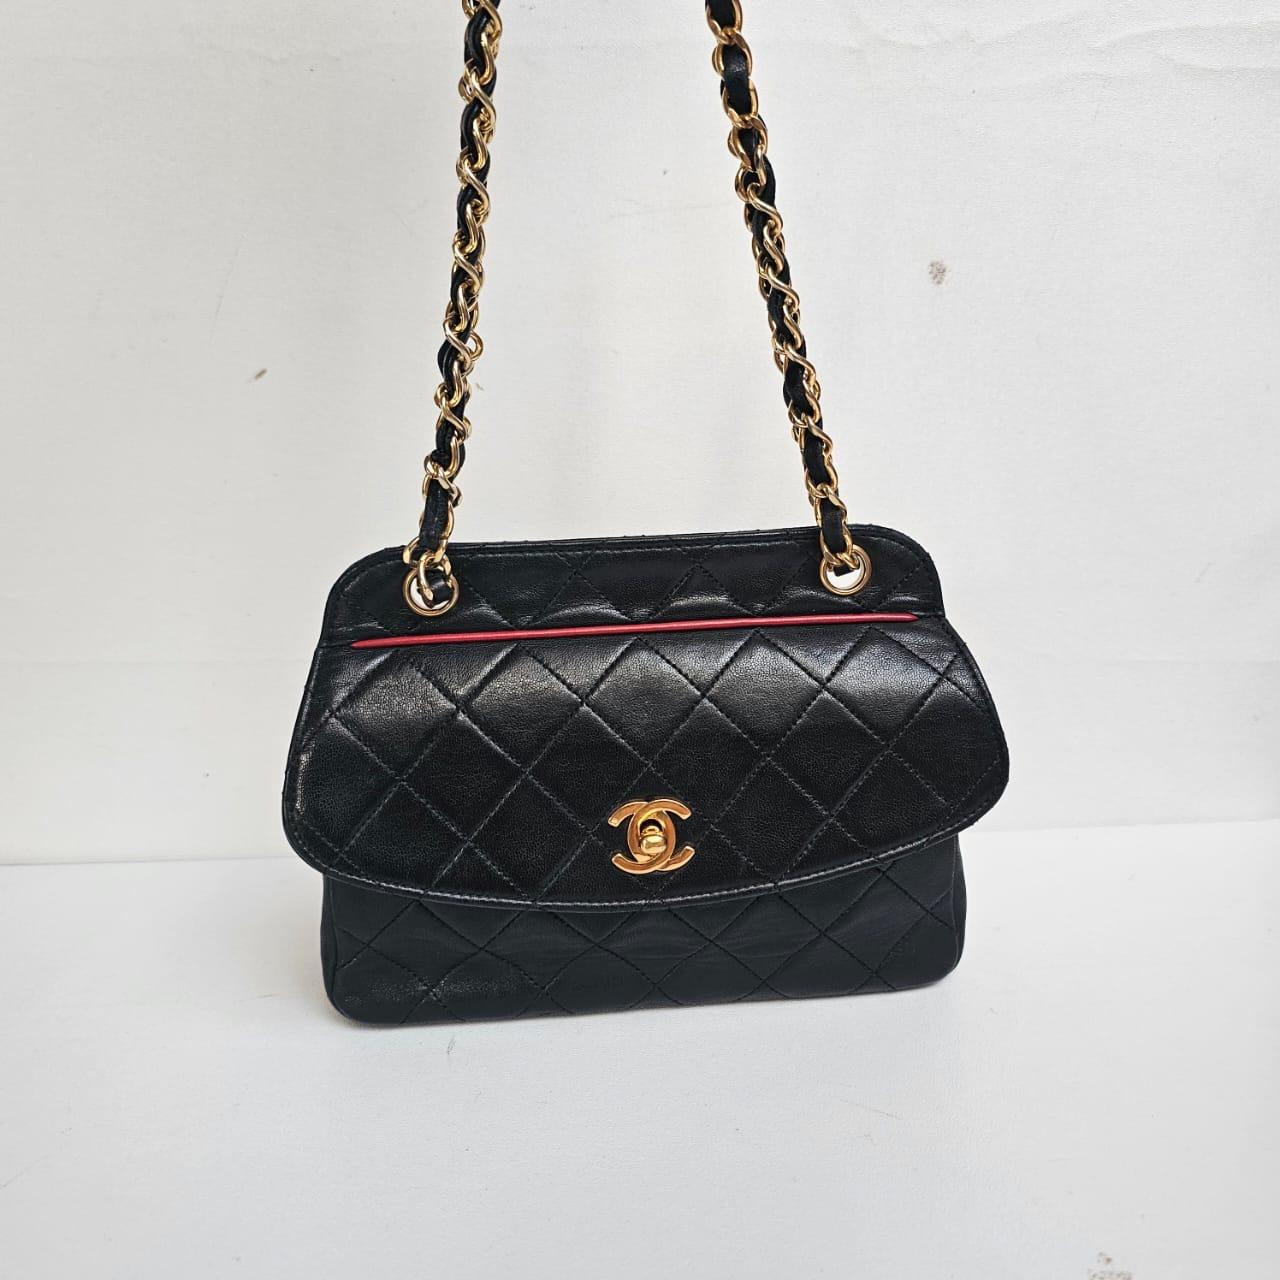 Mini vintage Chanel in black lambskin with gold hardware. Very cute and versatile piece. Can be worn as shoulder and crossbody. Faint scratching and scuffs due to the nature of the leather. Light creasing on the leather. Comes with its matching flat